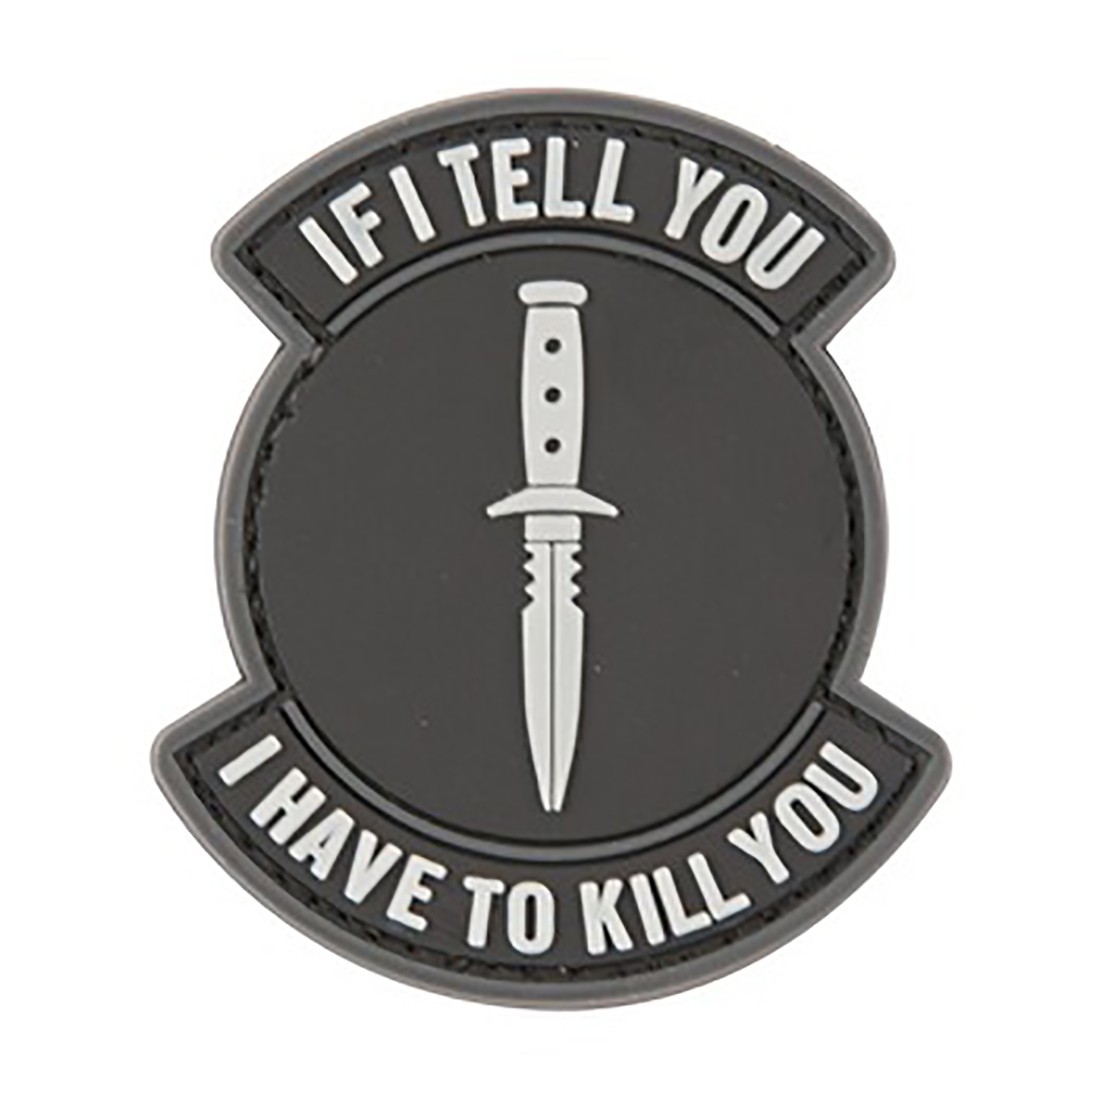 IF I TELL YOU (Black) Tactical Rubber Velcro Patches